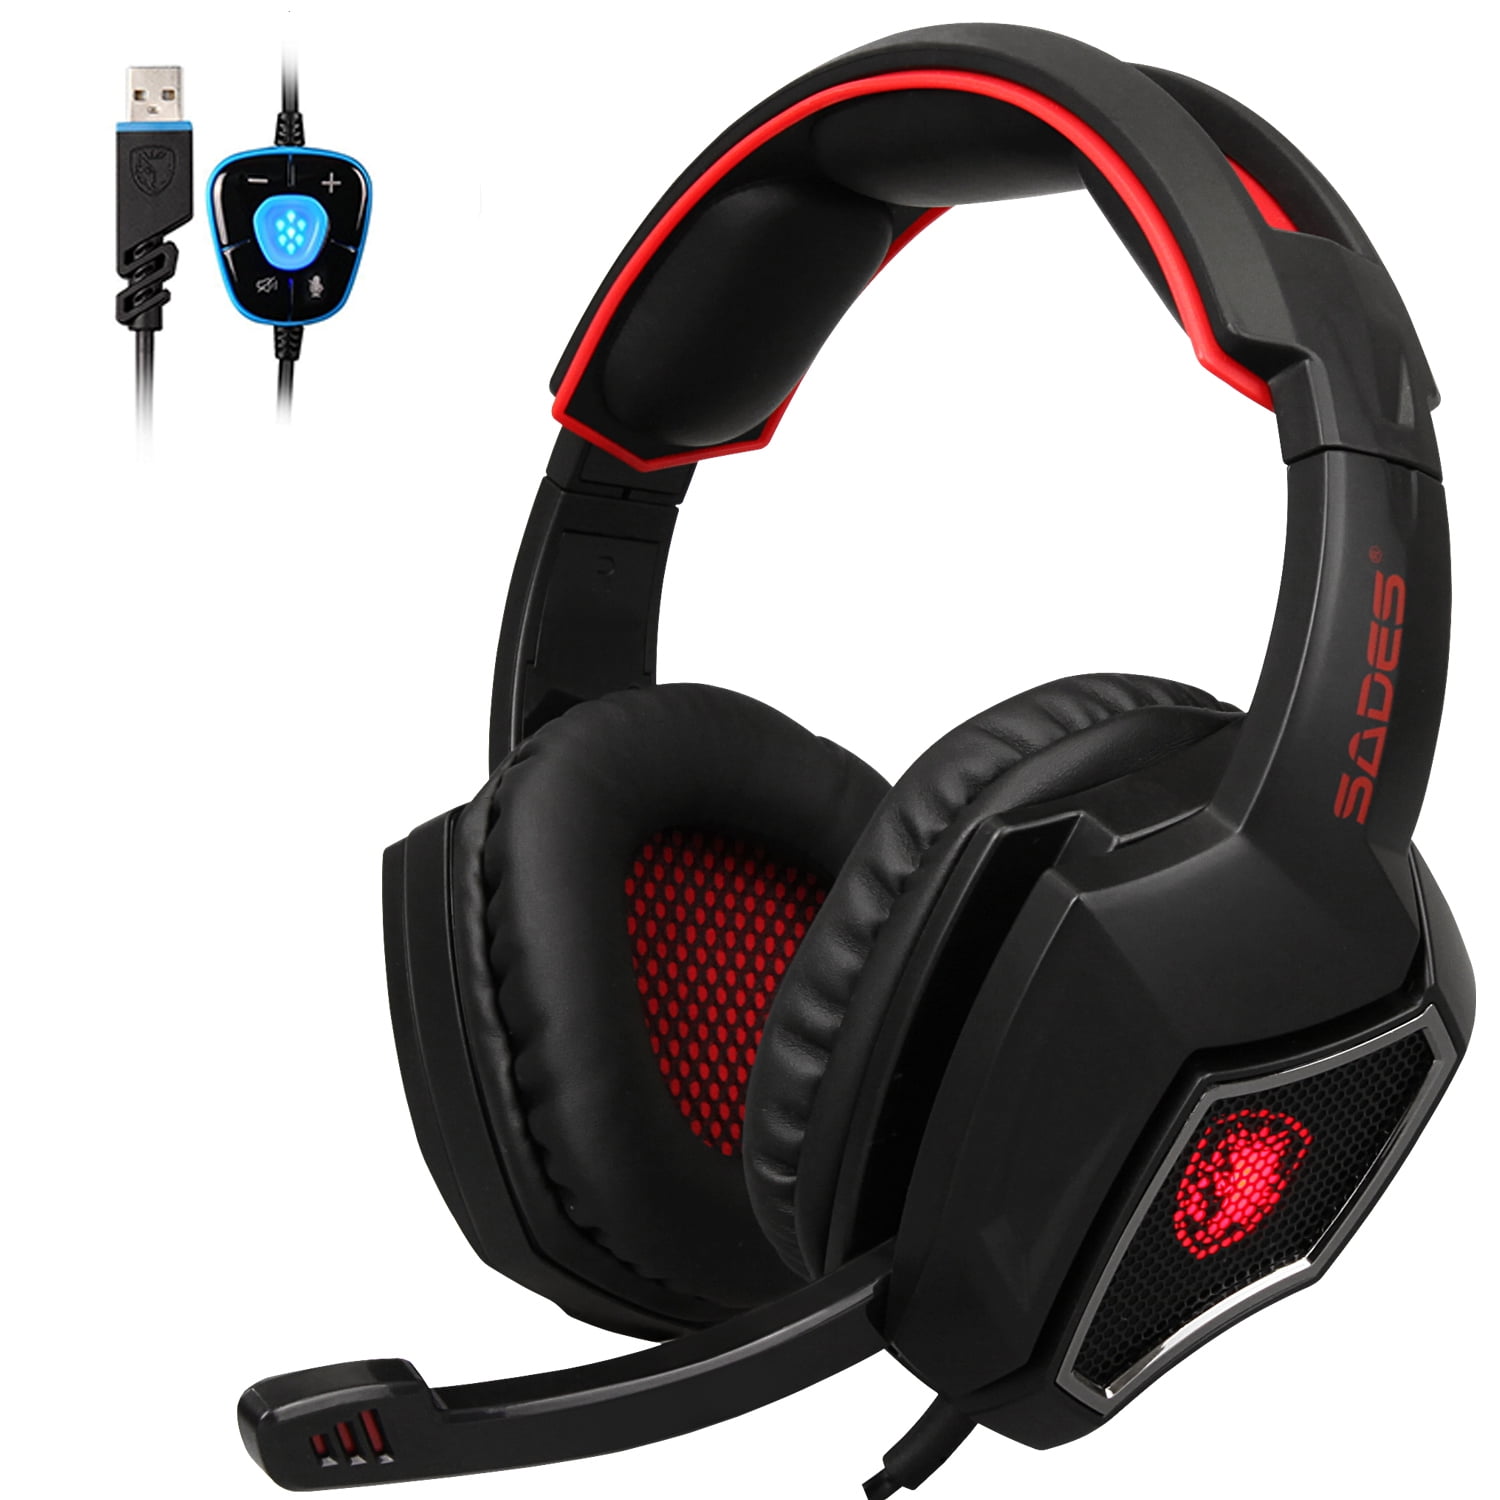 SADES with Noise Surround Gaming MIC Gamers USB PC Spirit Control Volume Stereo Wolf Headset For Isolating 7.1 Sound Over-the-Ear